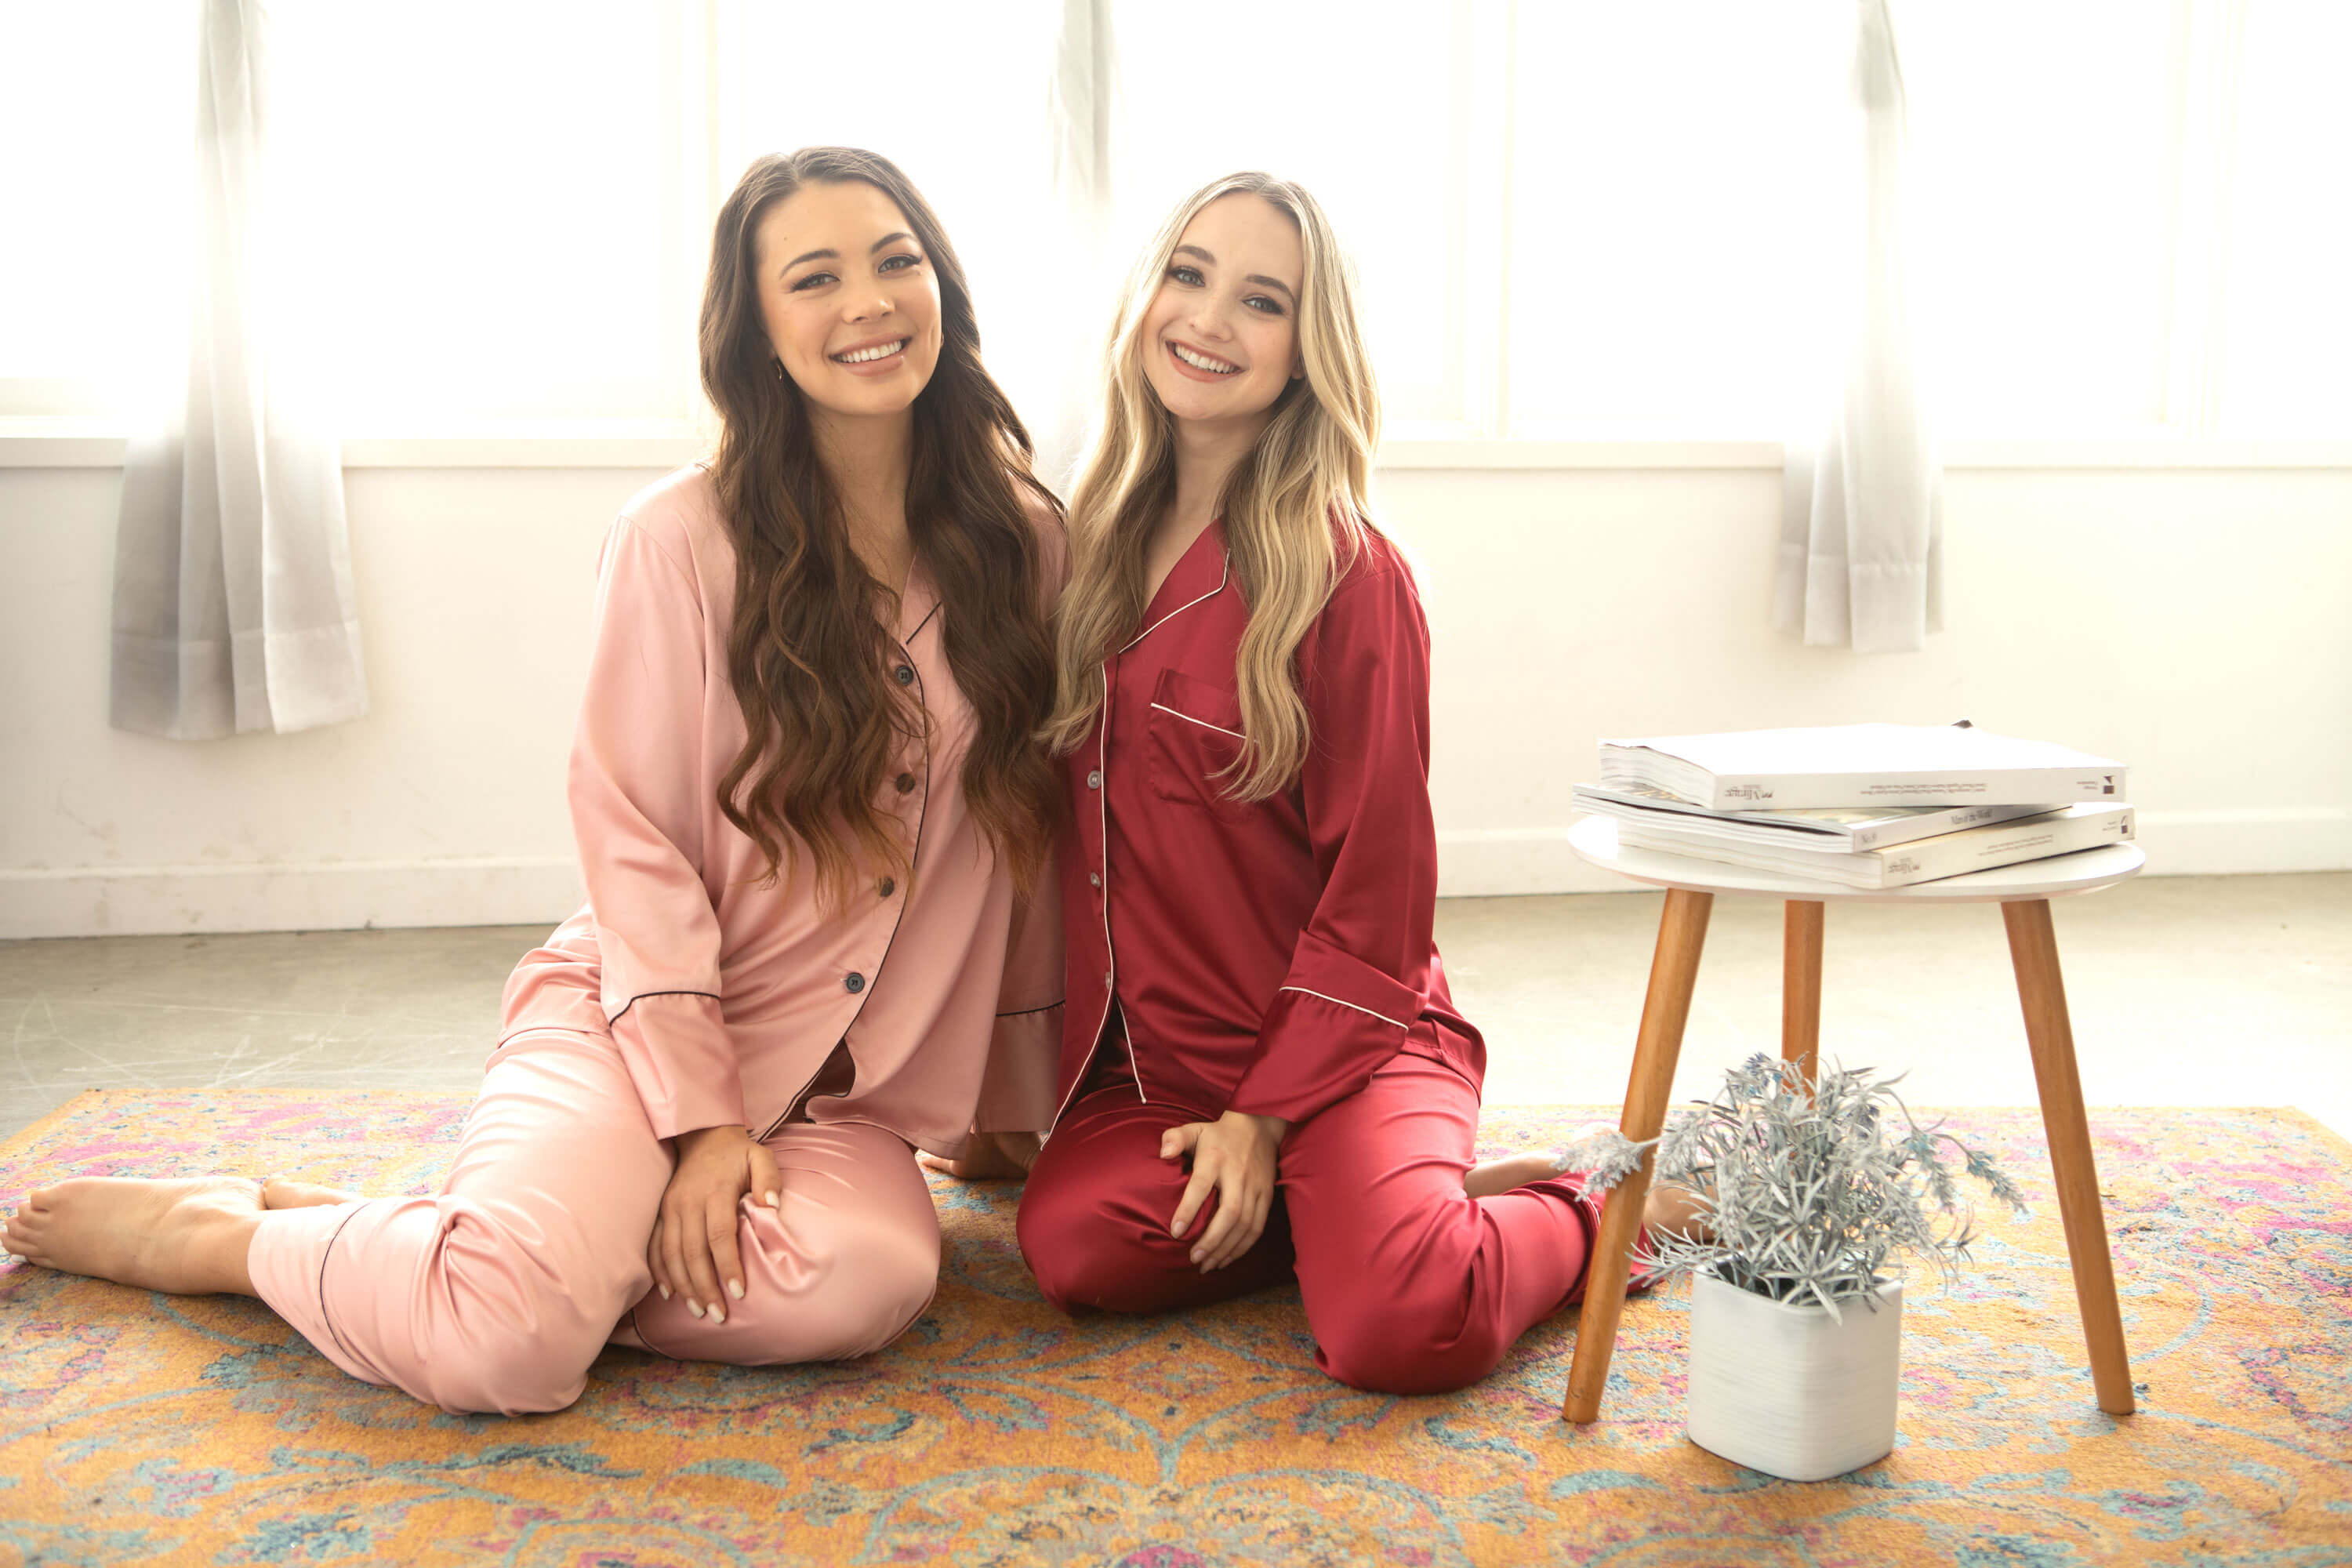 Personalized Bridal Pajamas - Two beautiful models dressed in dusty rose and burgundy bridal party pajama pants set with monogram design in preparation for a bachelorette party, wedding or any fun occasion.